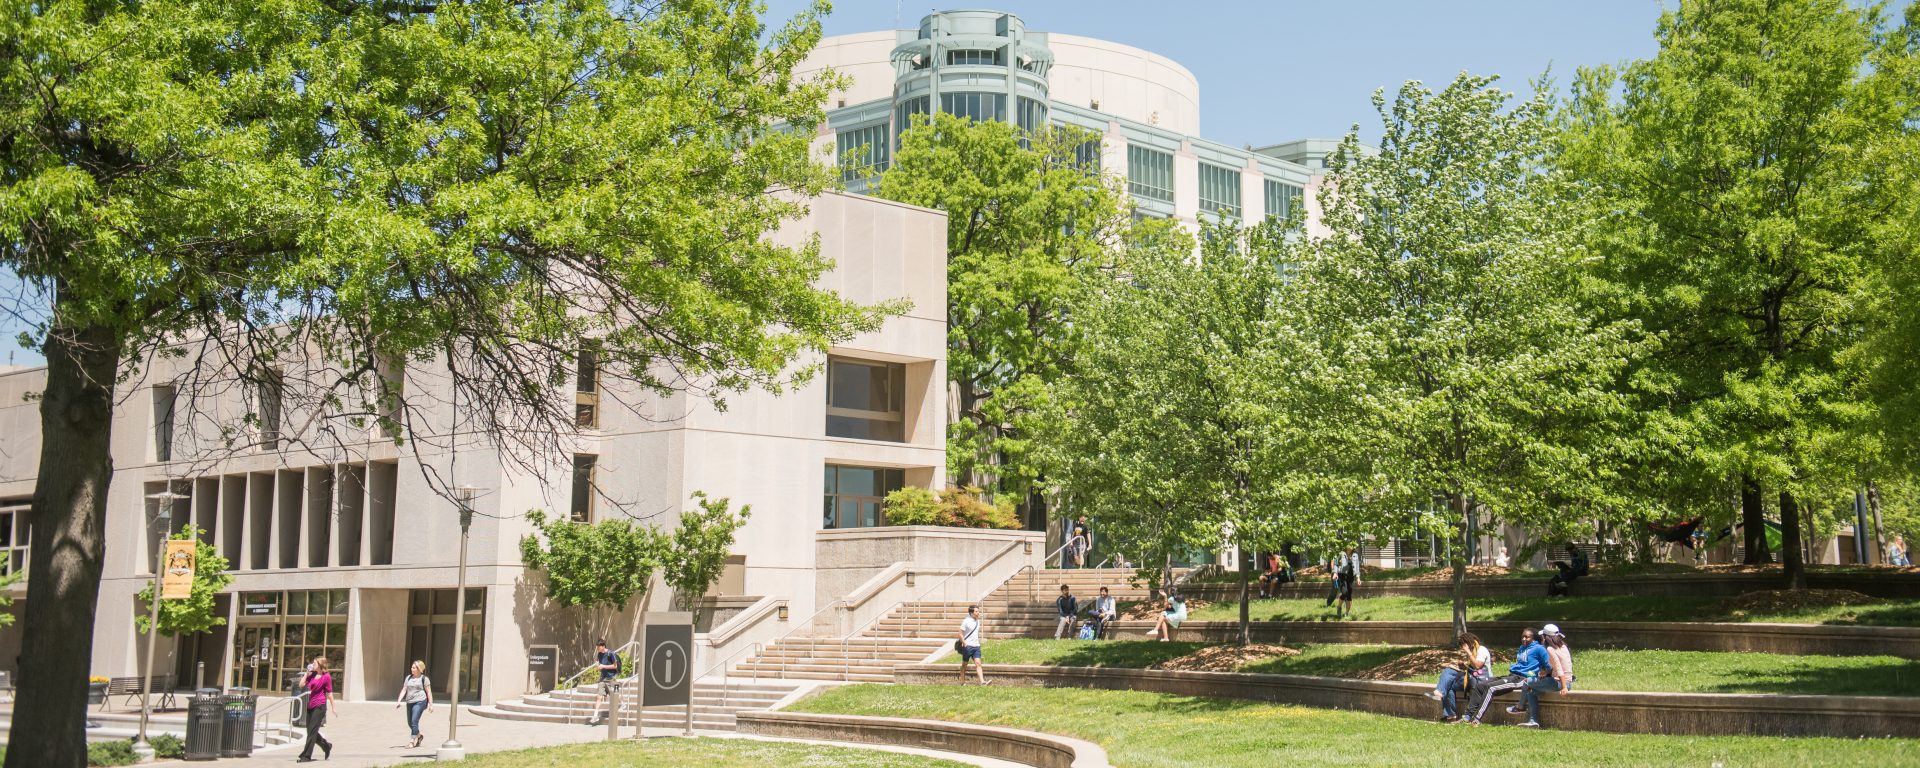 Umbc Spring 2023 Academic Calendar Umbc Will Be Test-Optional For Fall 2021 Applicants - Umbc: University Of  Maryland, Baltimore County